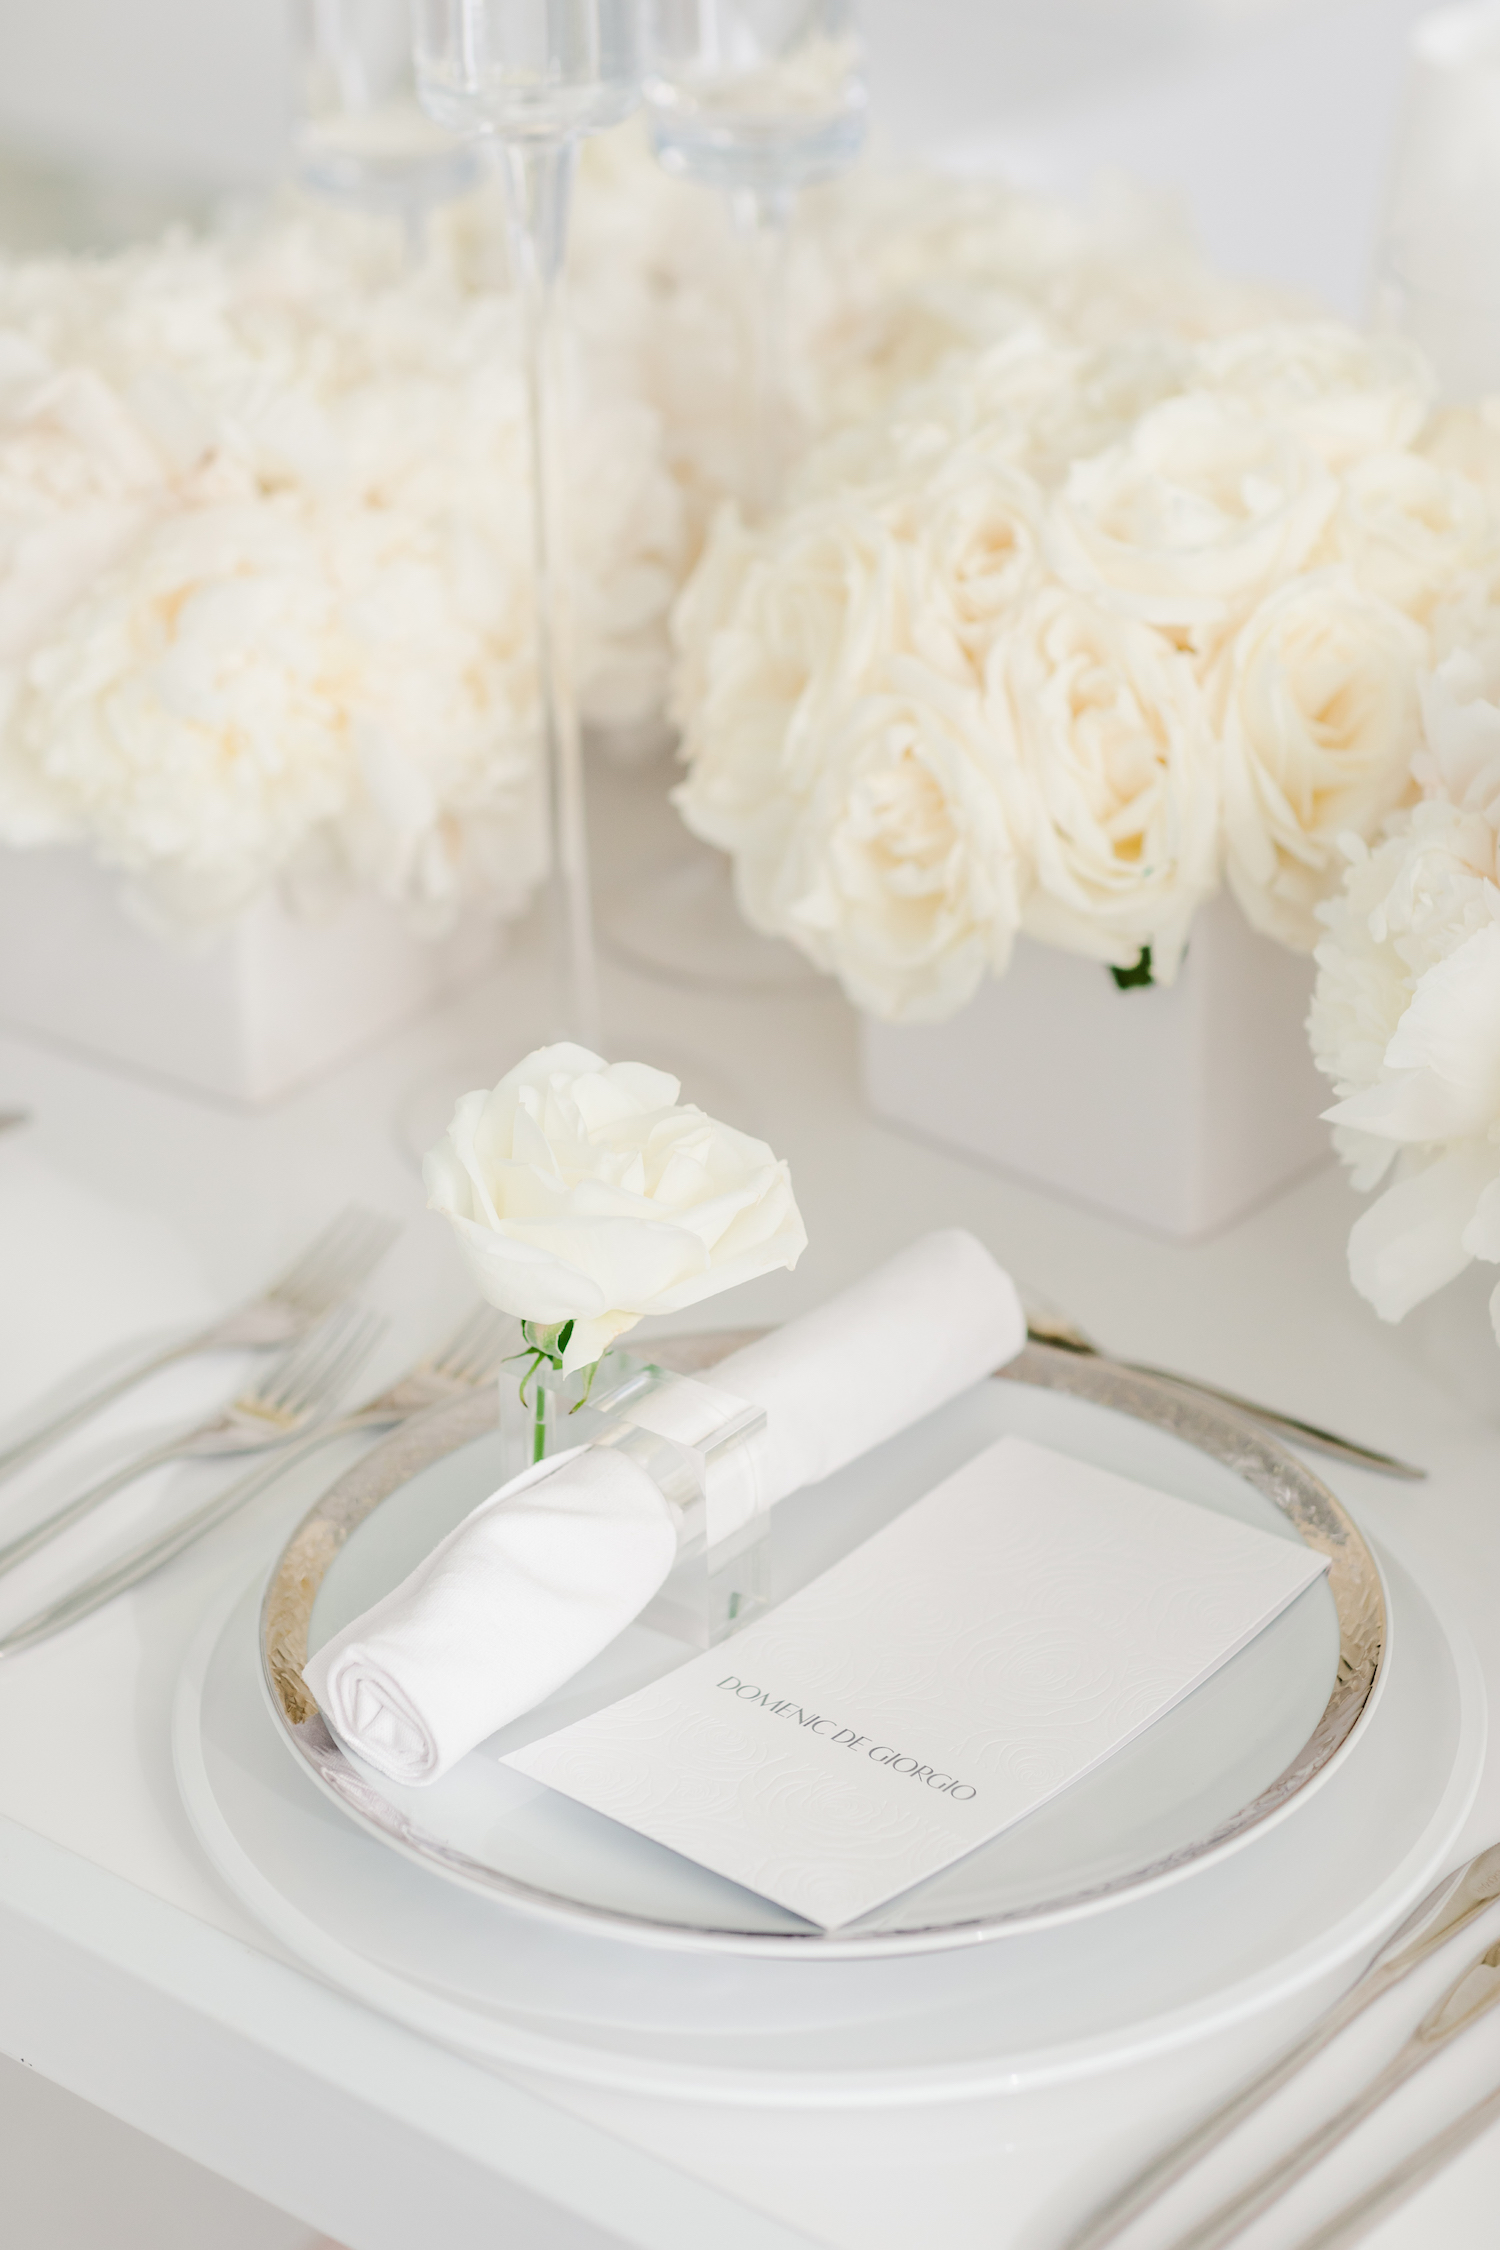 all white luxury wedding placesetting